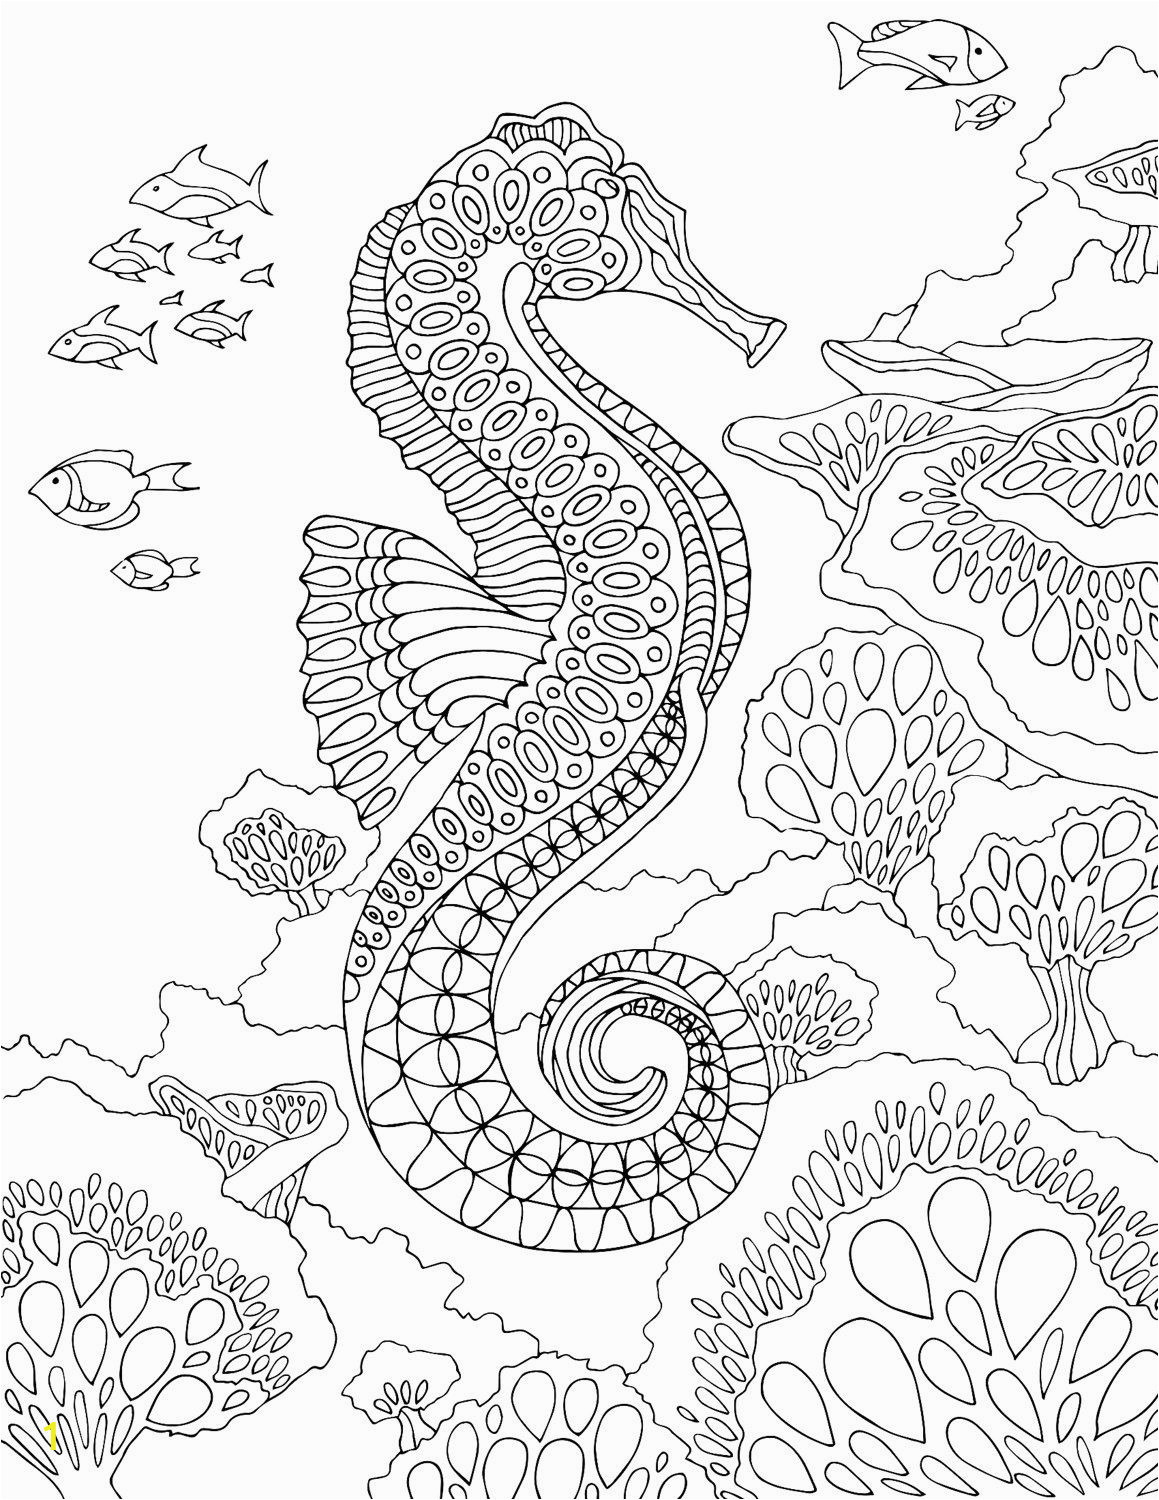 Under the Sea Coloring Pages Seahorse Pdf Zentangle Coloring Page therapy Coloring